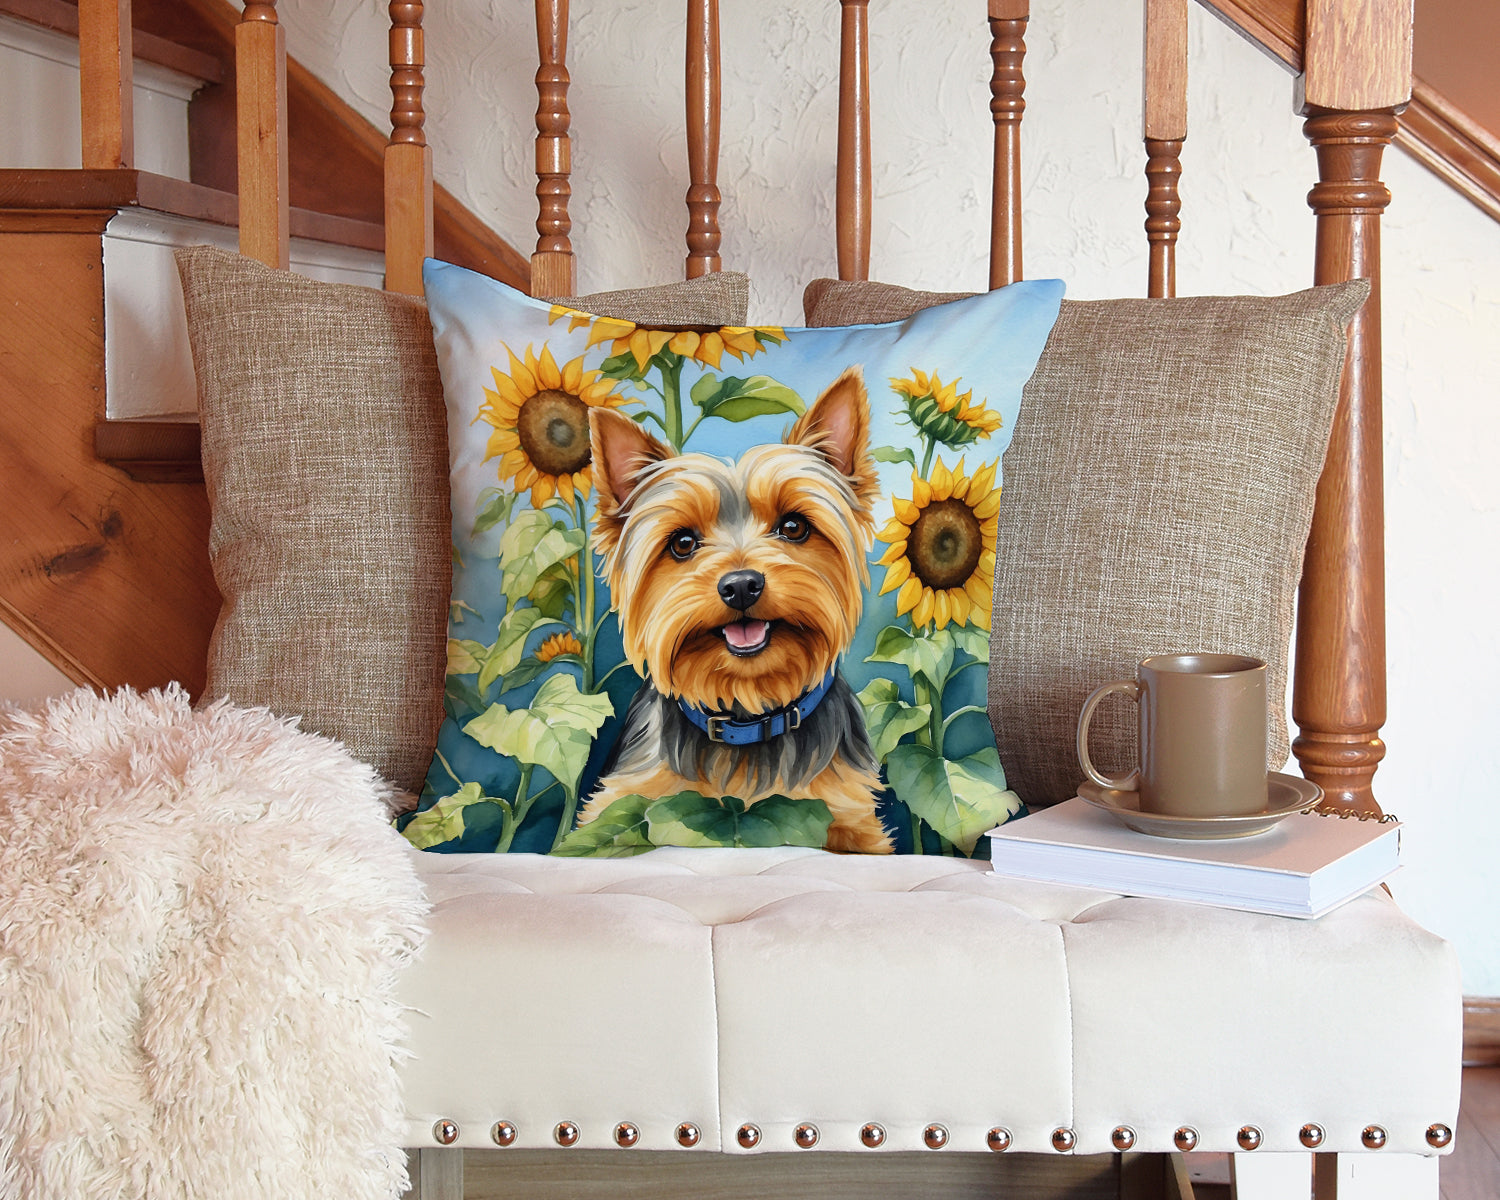 Silky Terrier in Sunflowers Throw Pillow